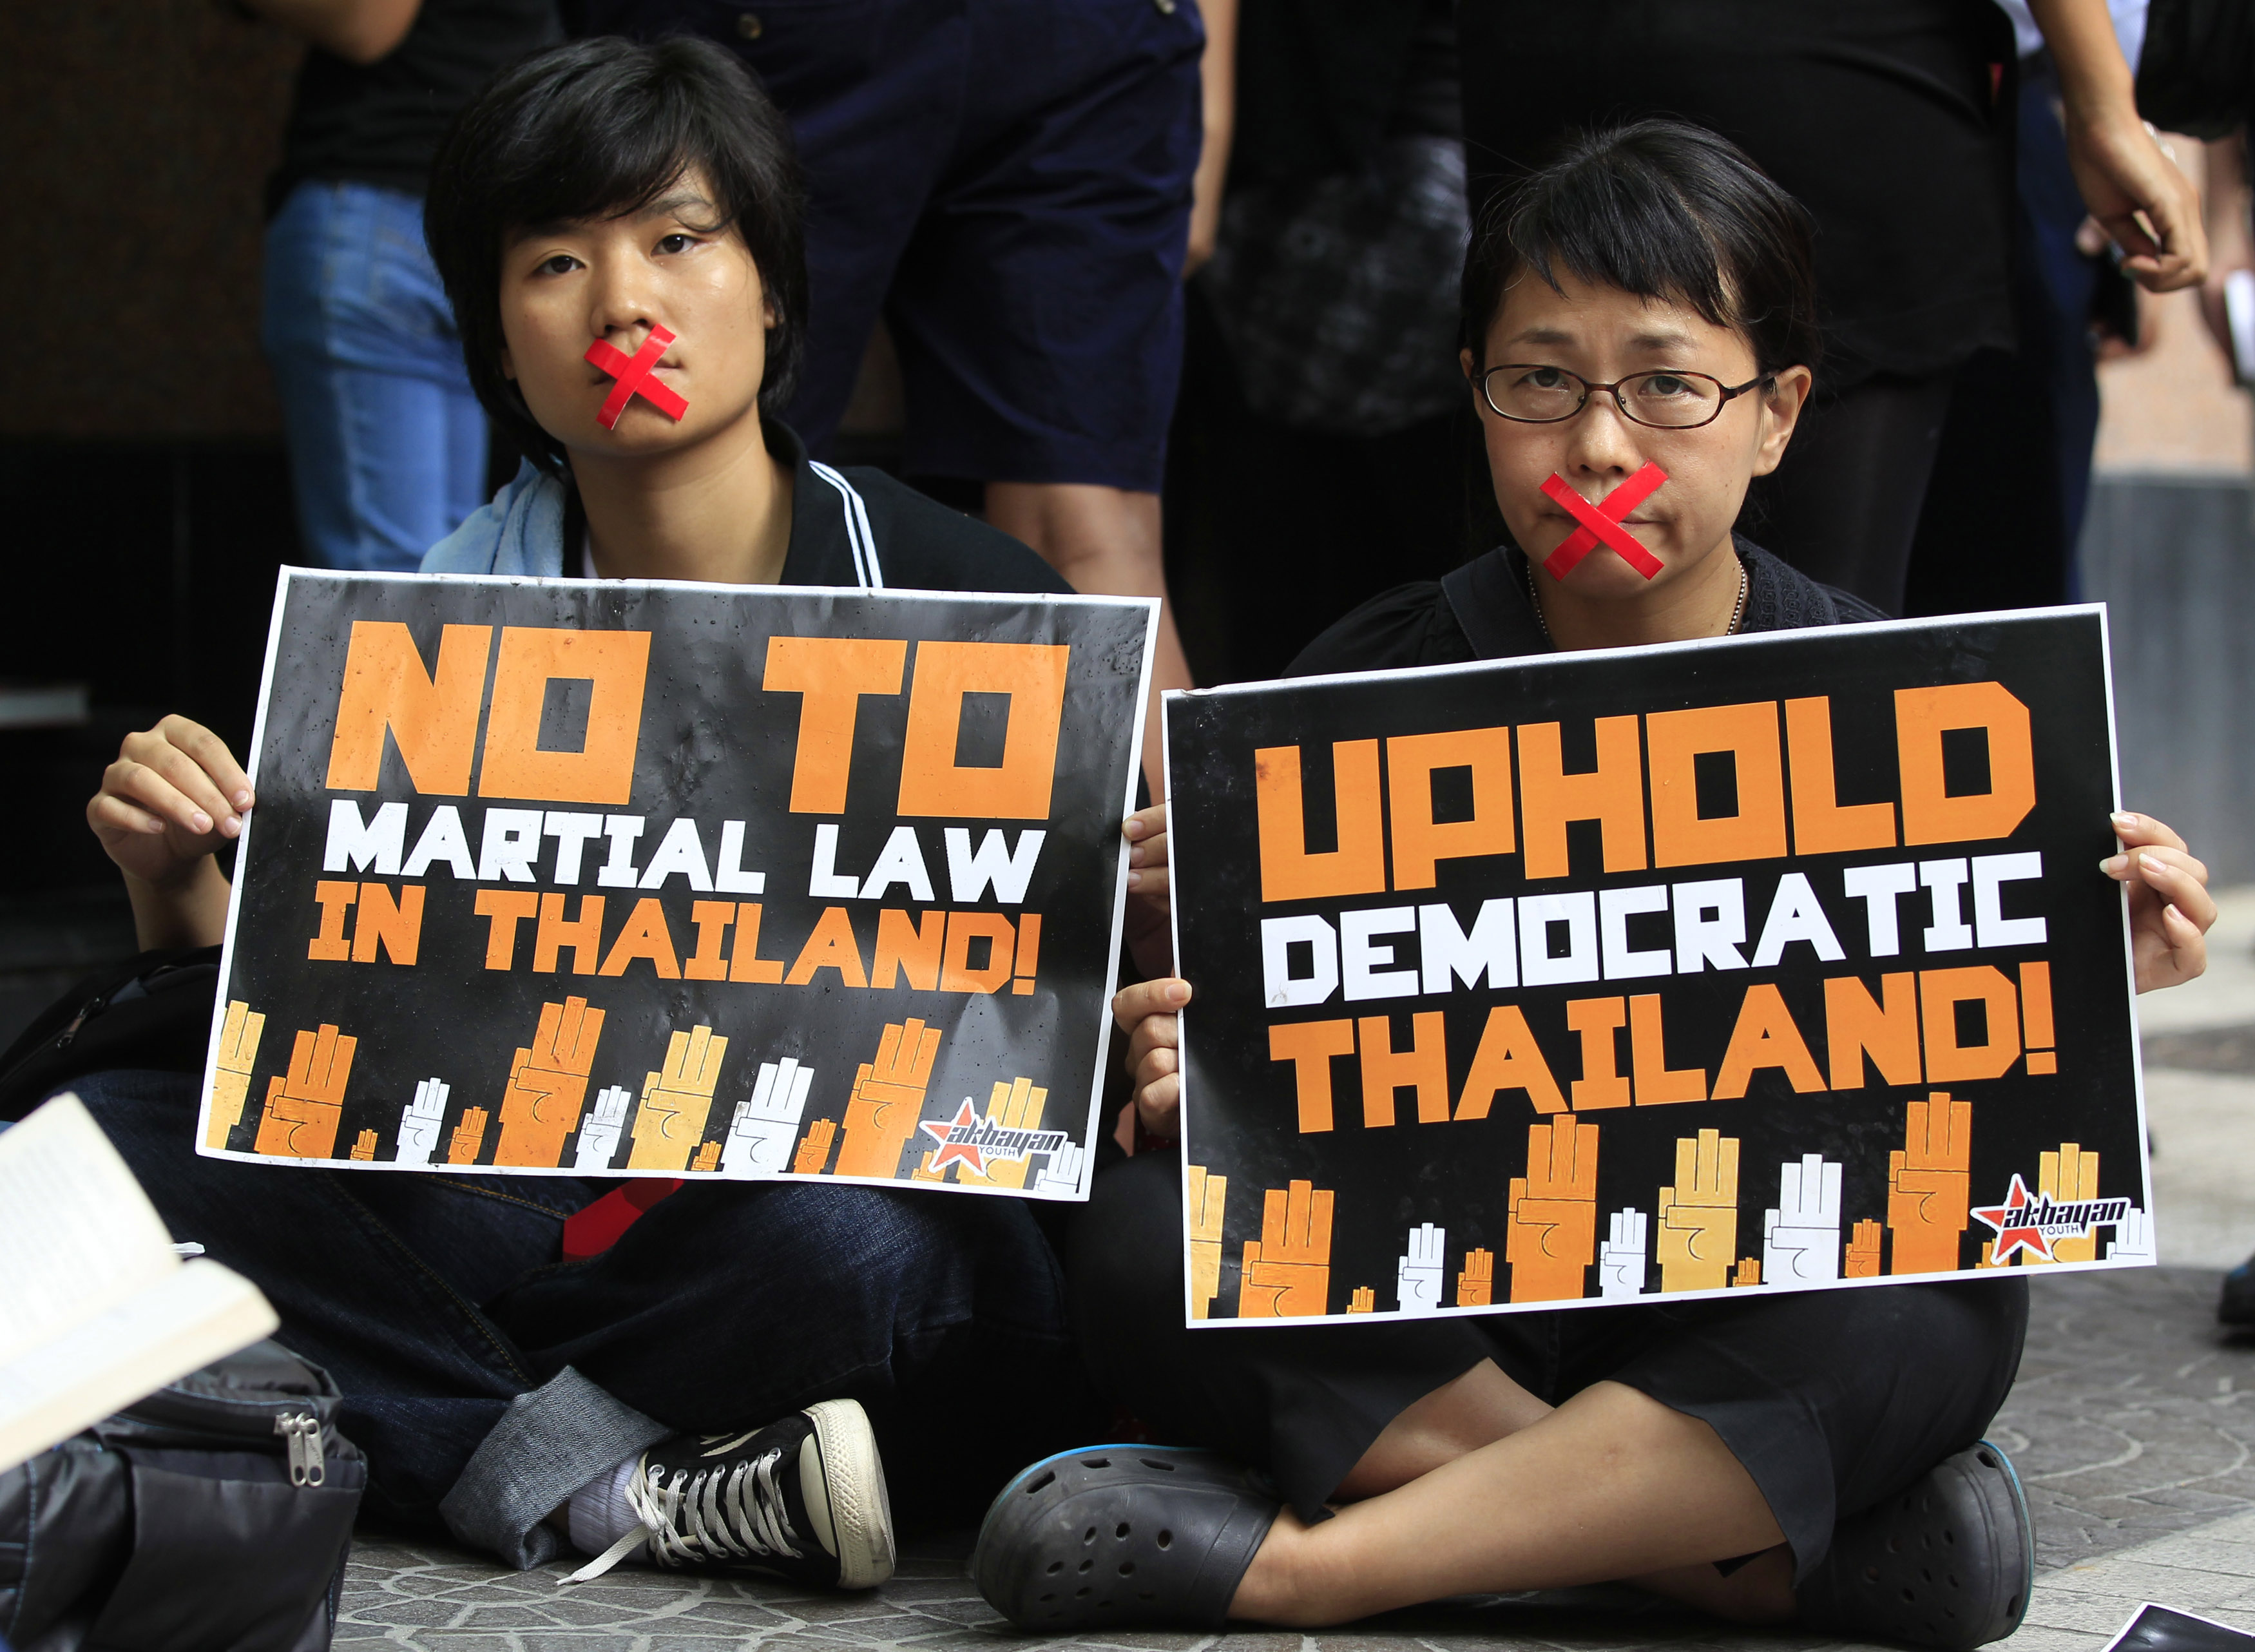 Activists, with their mouths taped up as a form of protest against the ongoing military rule in Thailand, hold placards during a picket in front of the Thai embassy in Manila